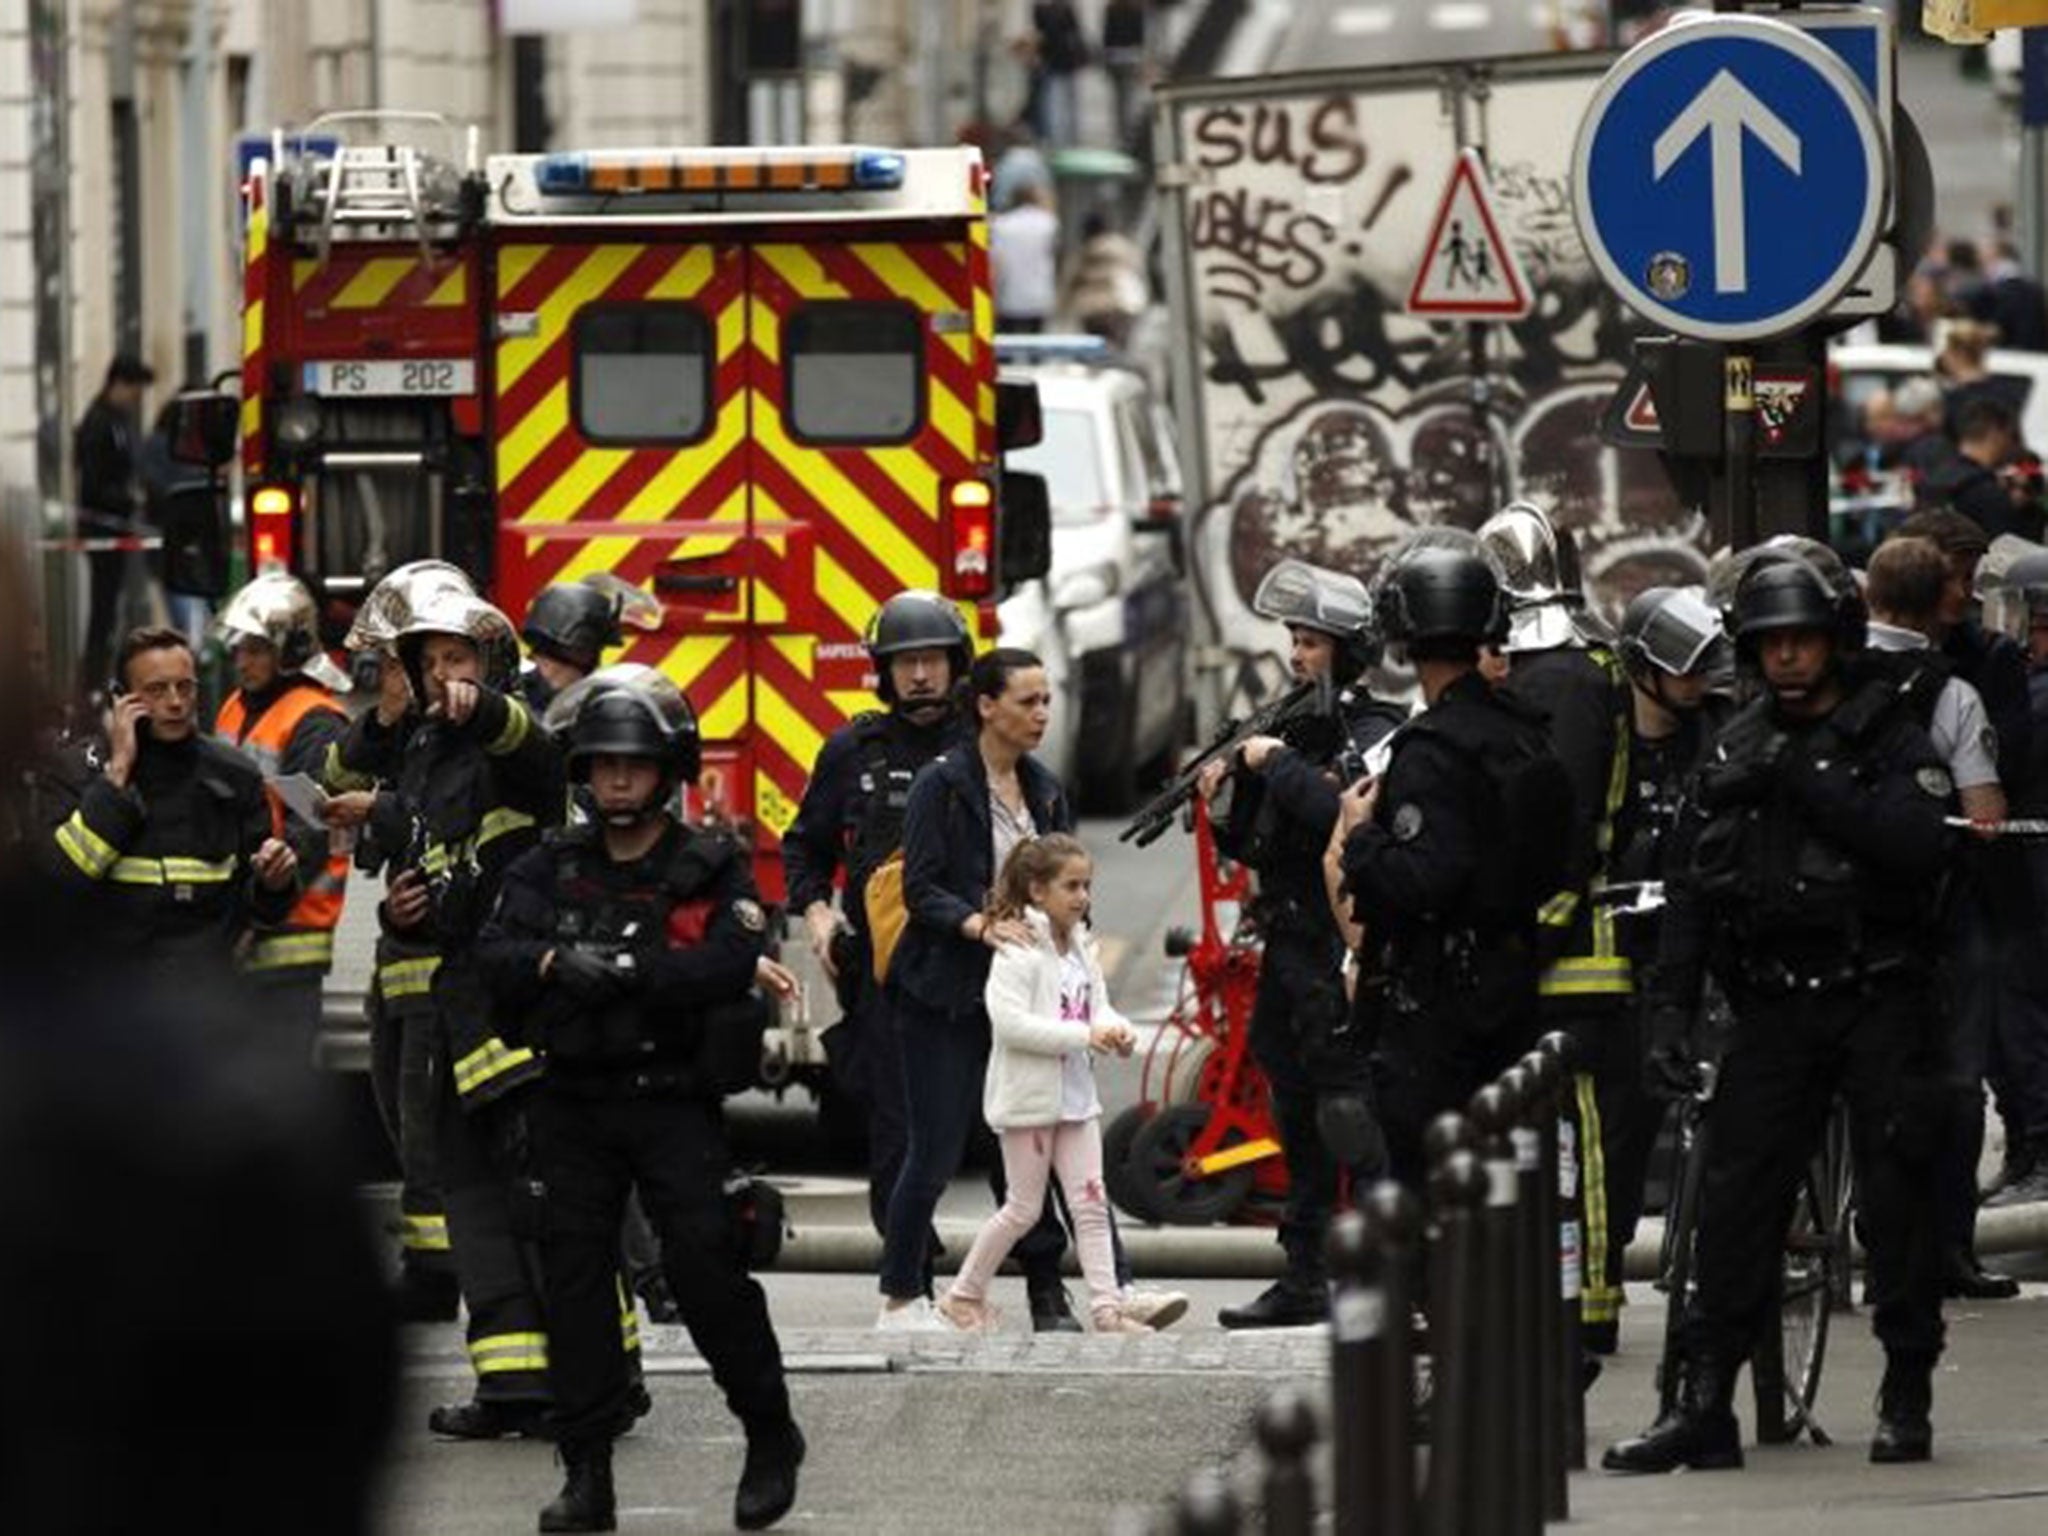 A woman and a young girl are evacuated by police forces during a hostage taking situation in Rue des Petites Ecuries, in Paris, France